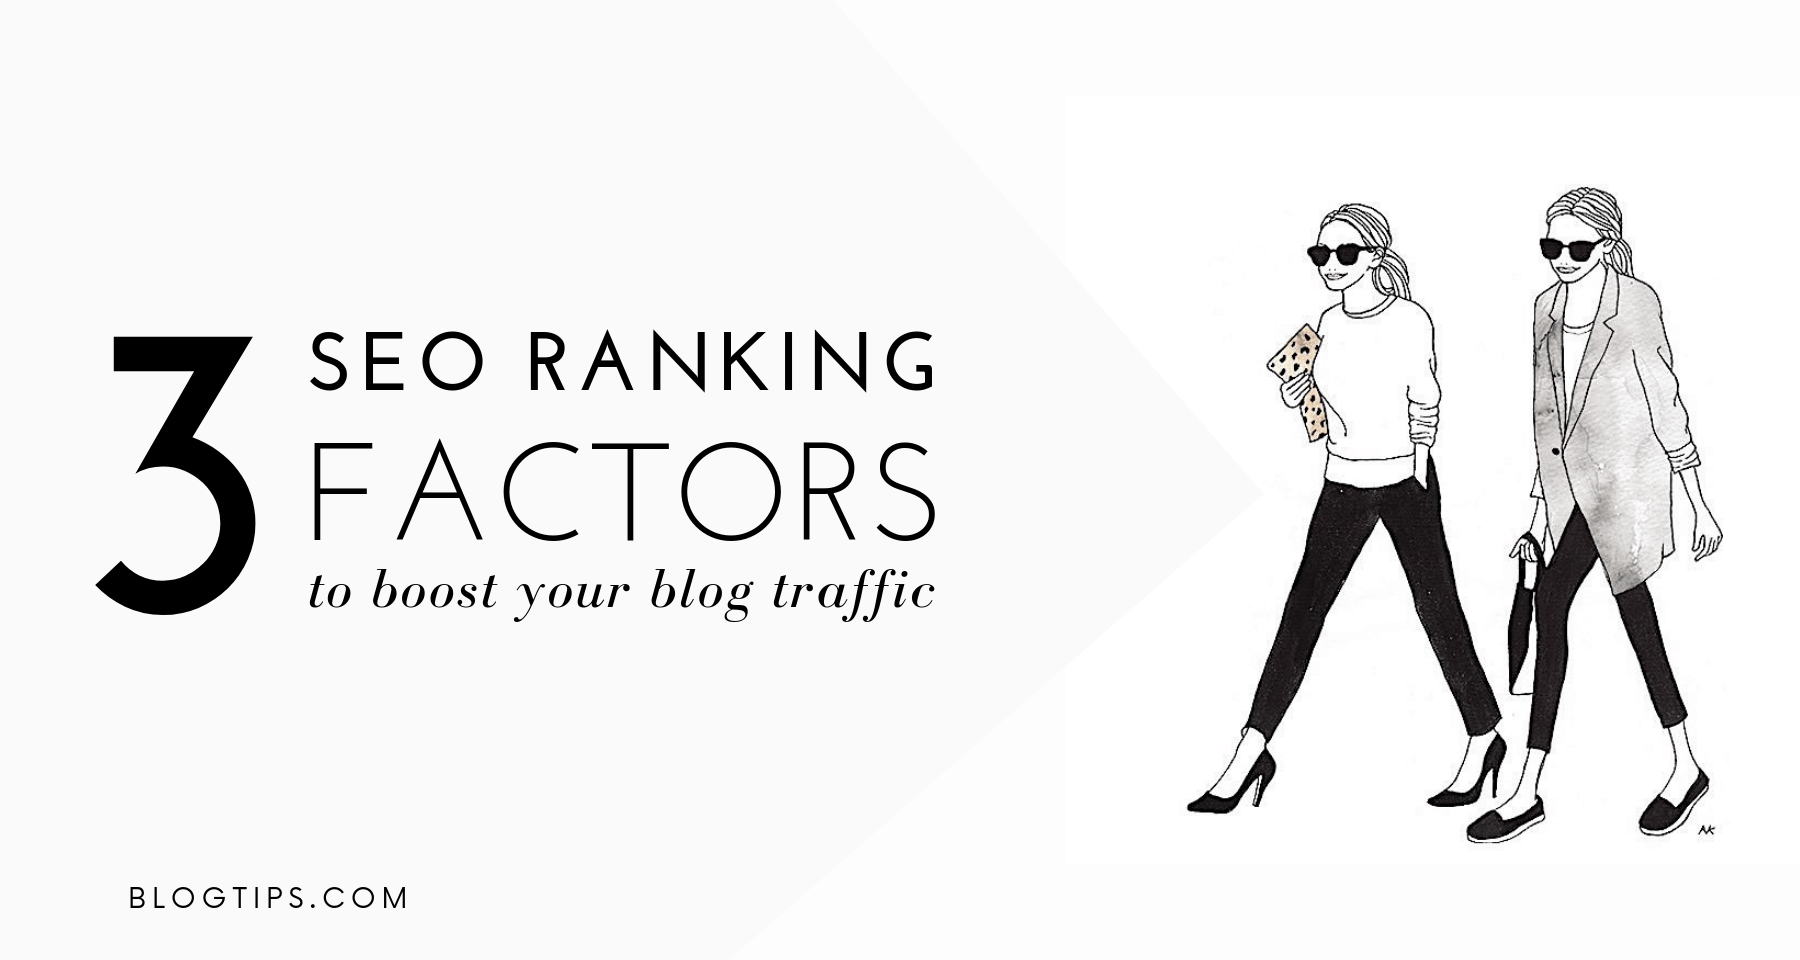 3 SEO Ranking Factors To Boost Your Organic Traffic SEO tips blogging tips BlogTips.com